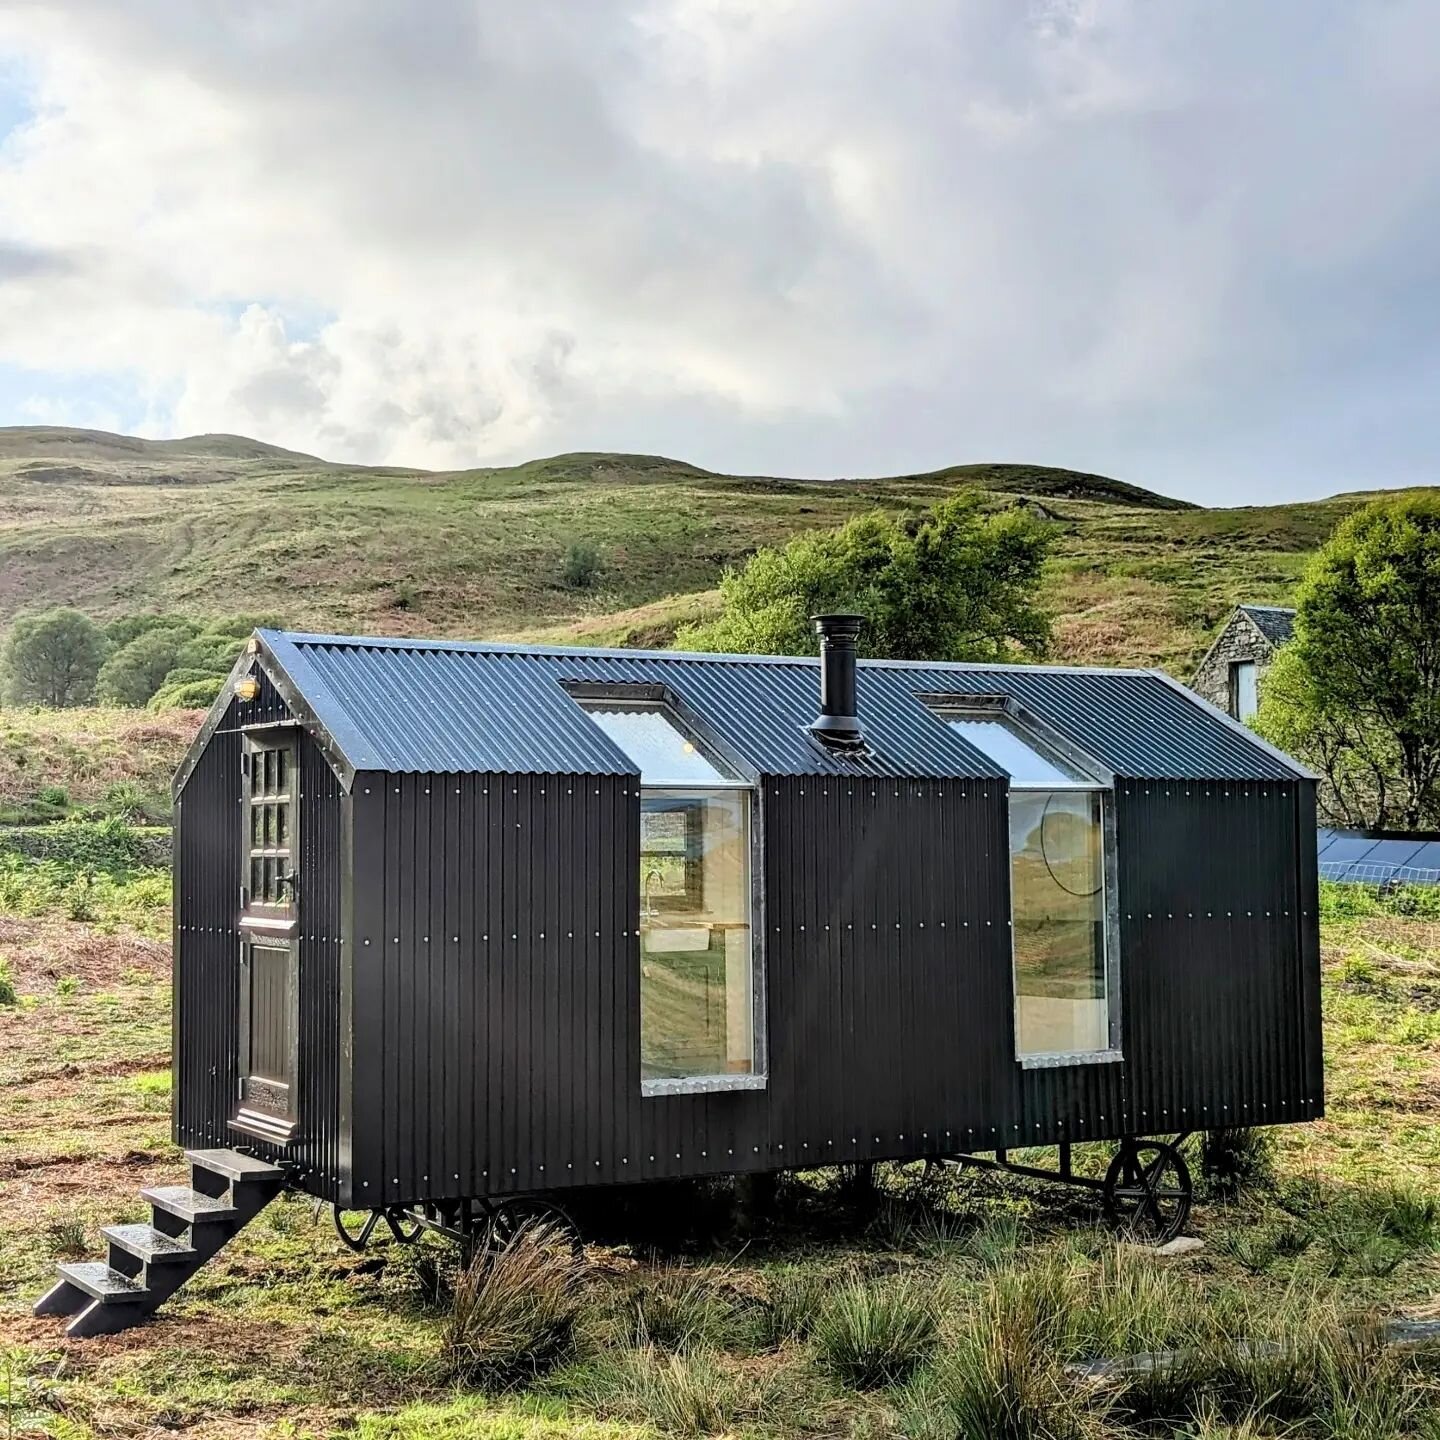 Our lovely all black Bothy really is Oliver's huts unique build. The Bothy offers a cosy space that works for a variety of uses and a place to reflect and take in  beautiful framed views.
The Bothy can go off-grid and make use of solar power or conne